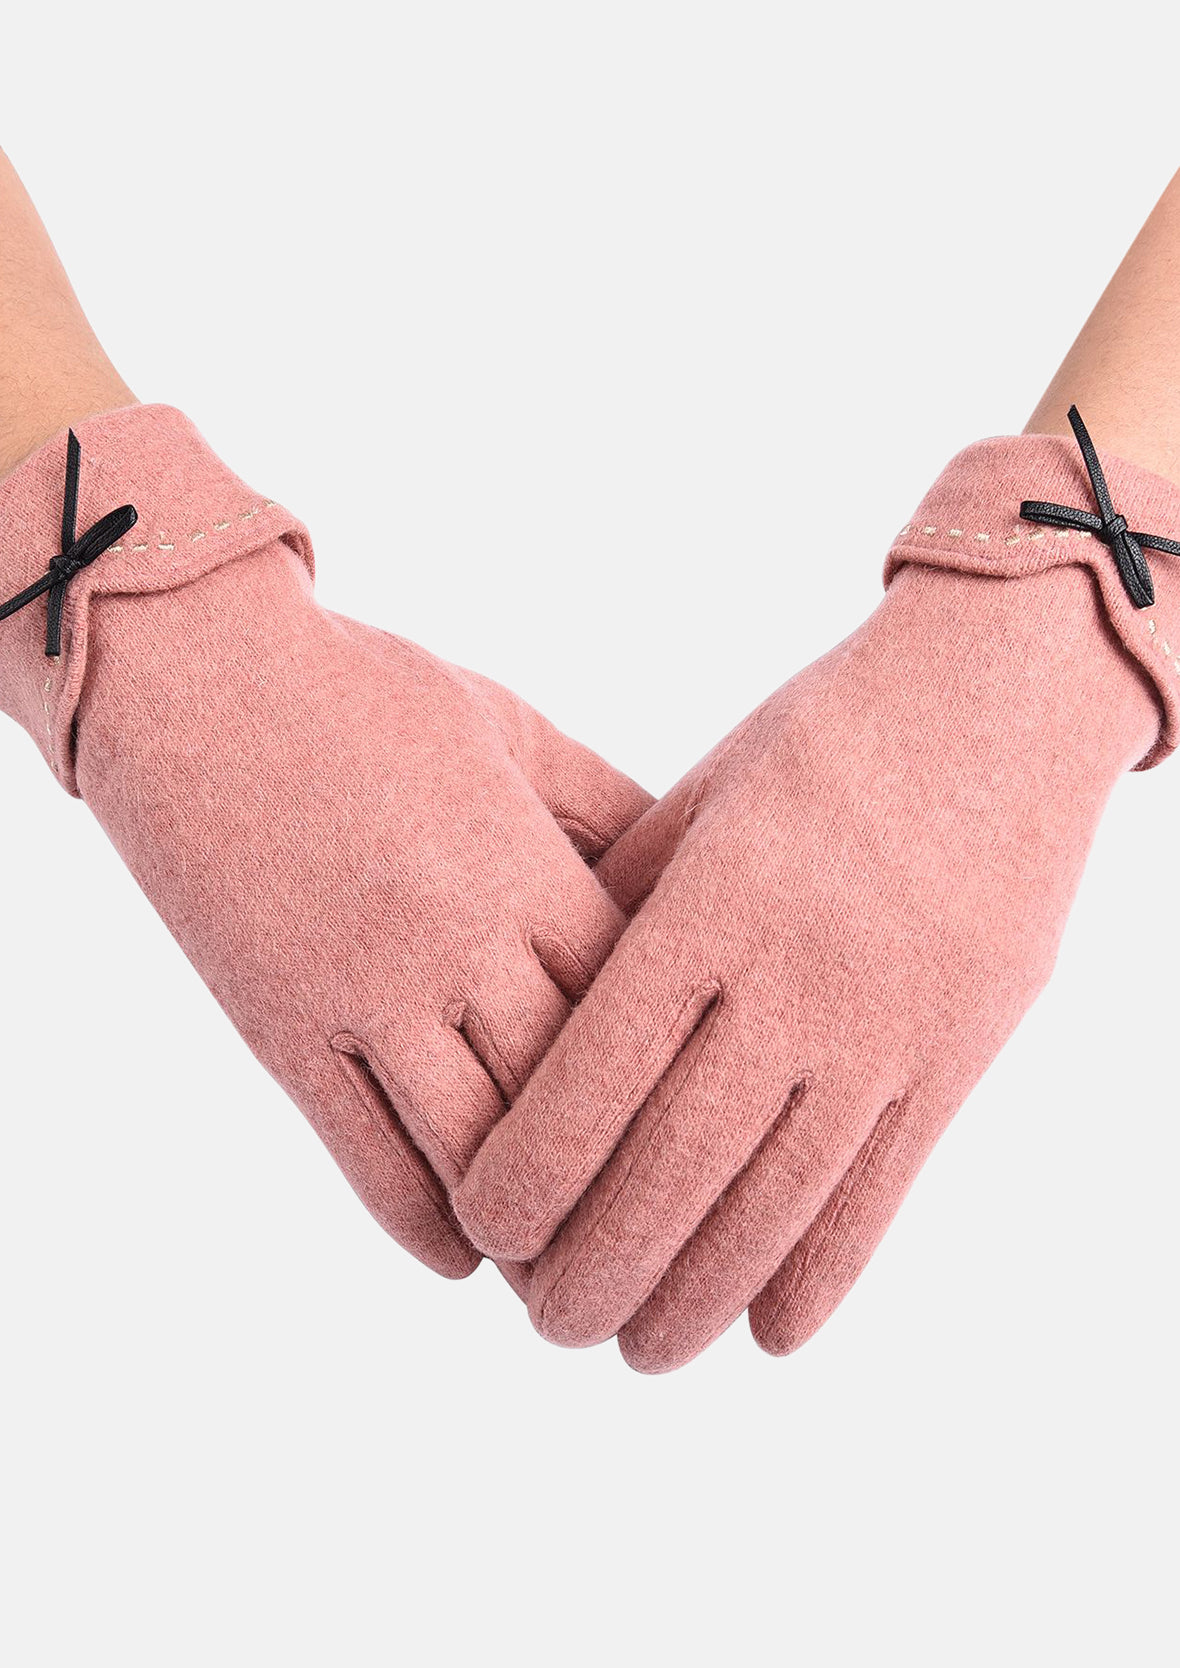 Warm Cashmere Gloves with Bowknot - Touch Screen Compatible